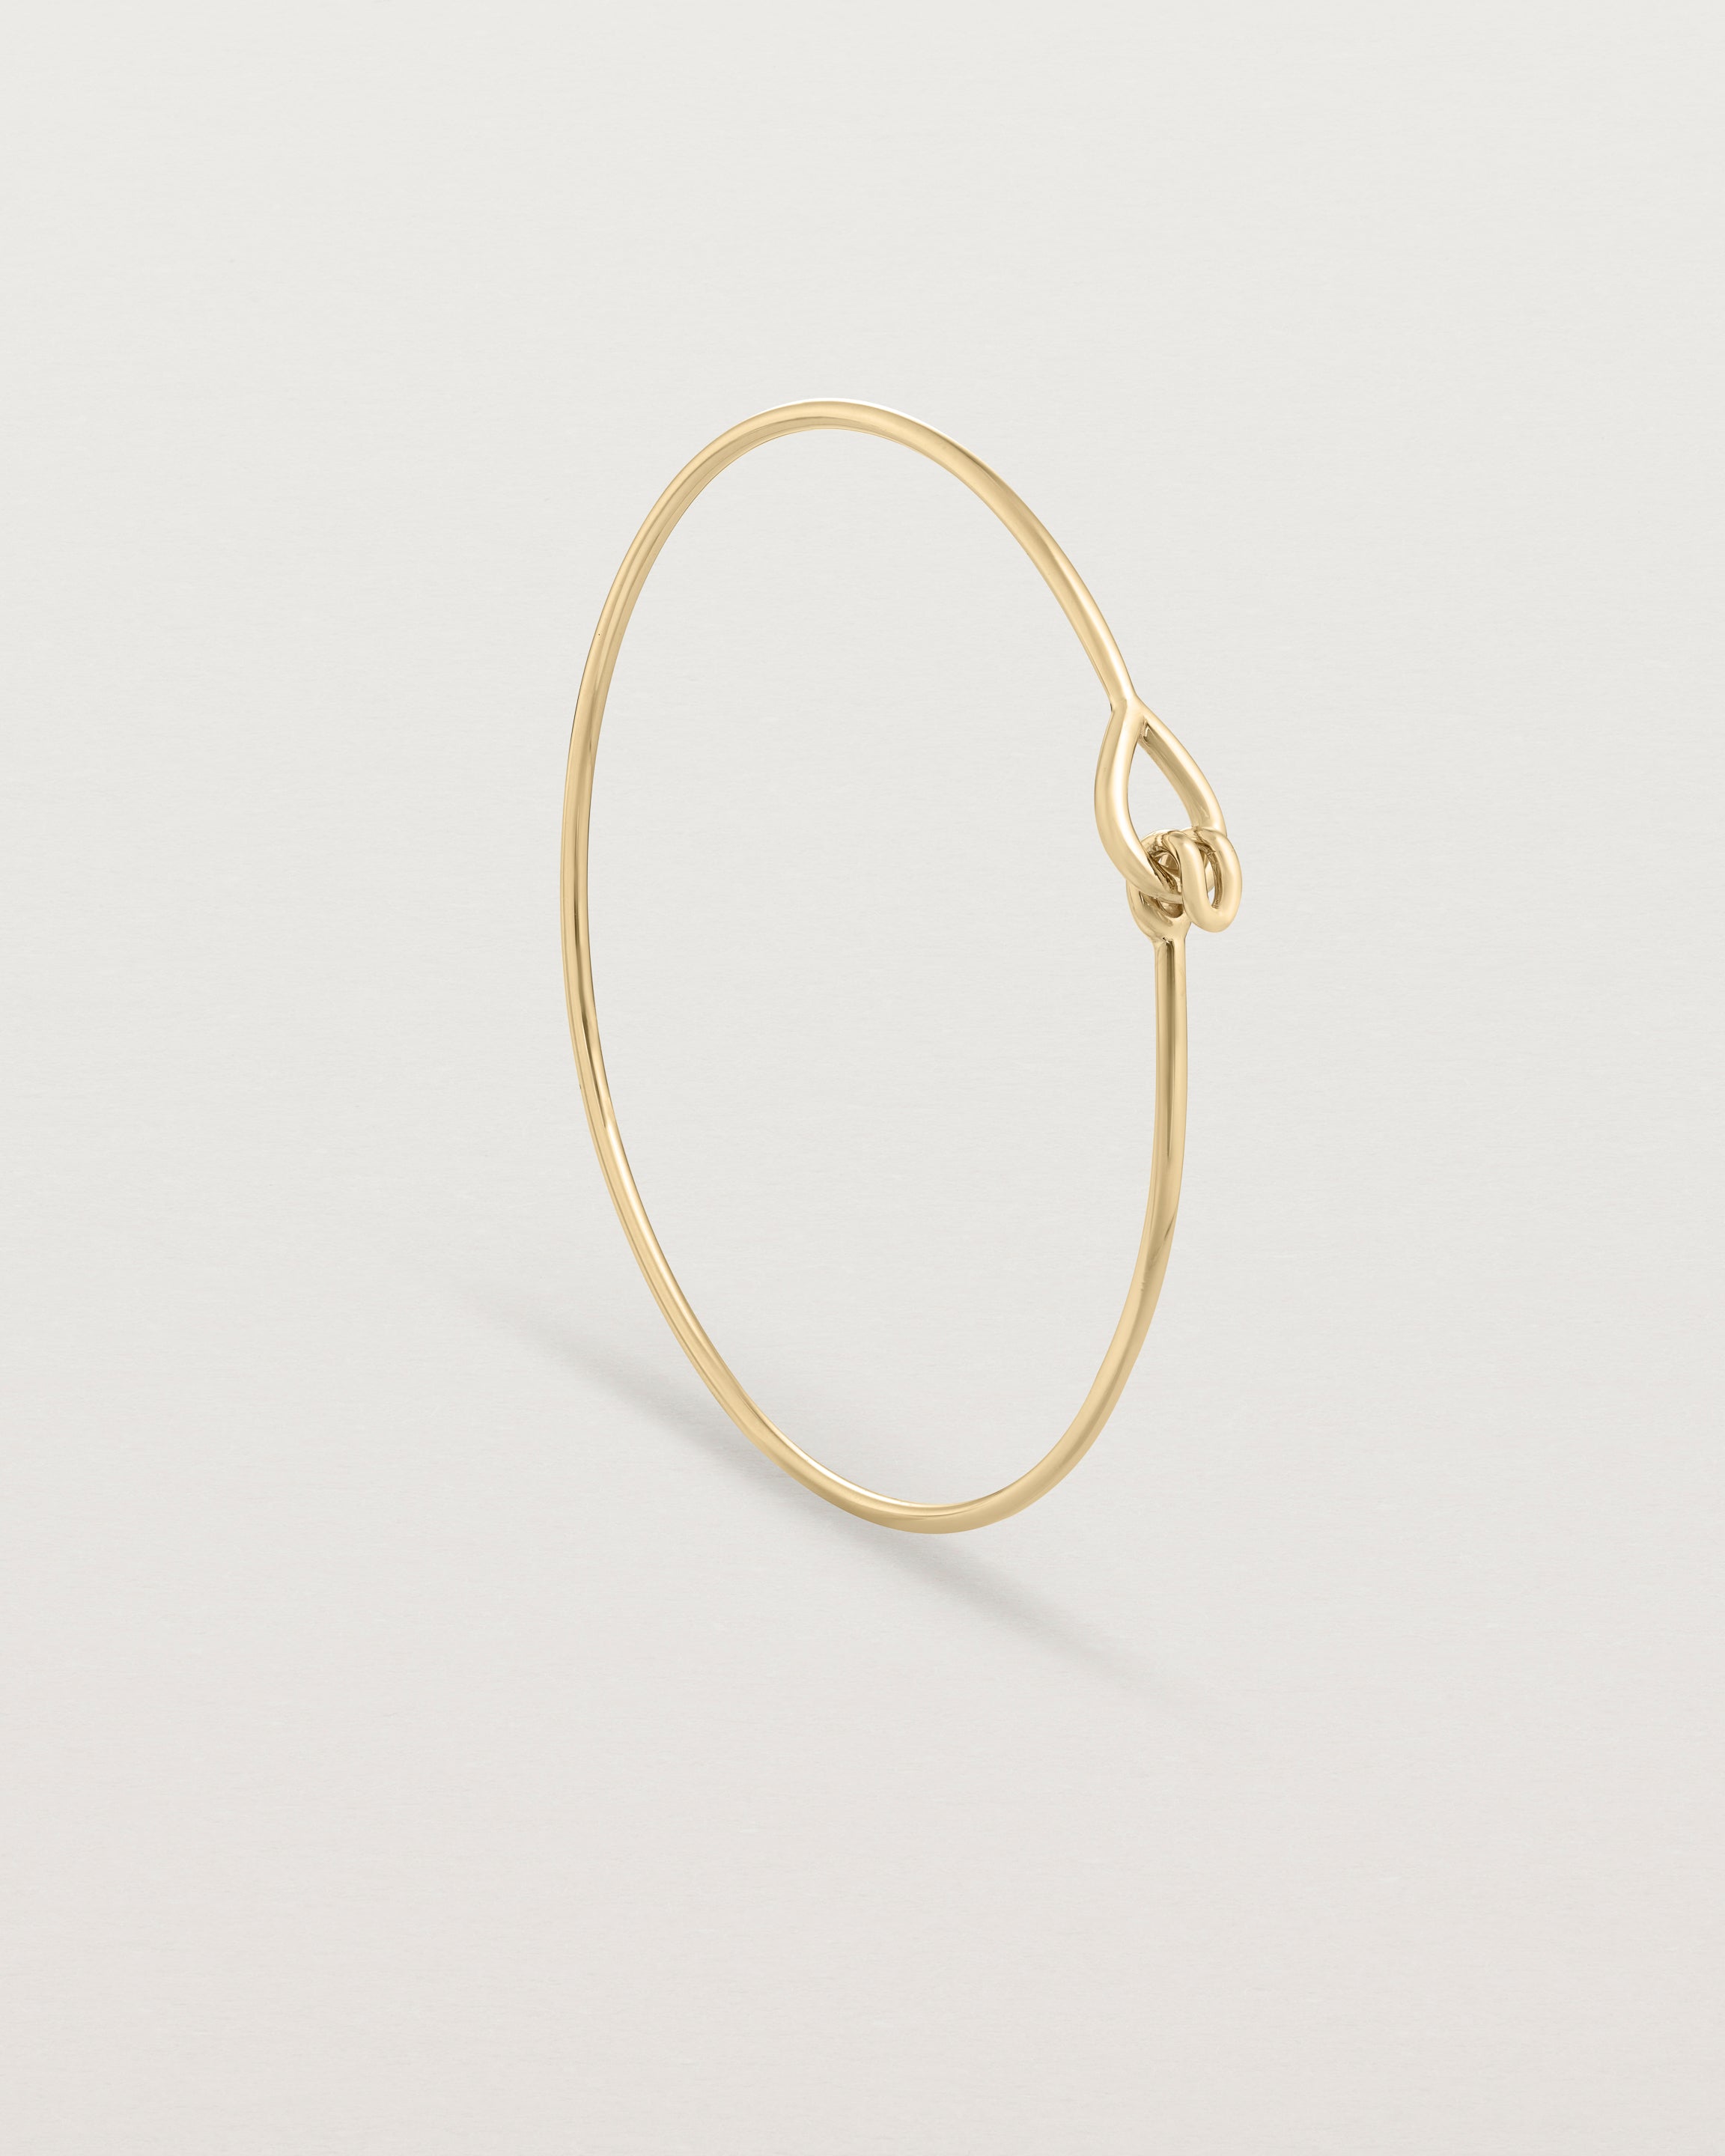 Standing view of the Oana Bangle in yellow gold.